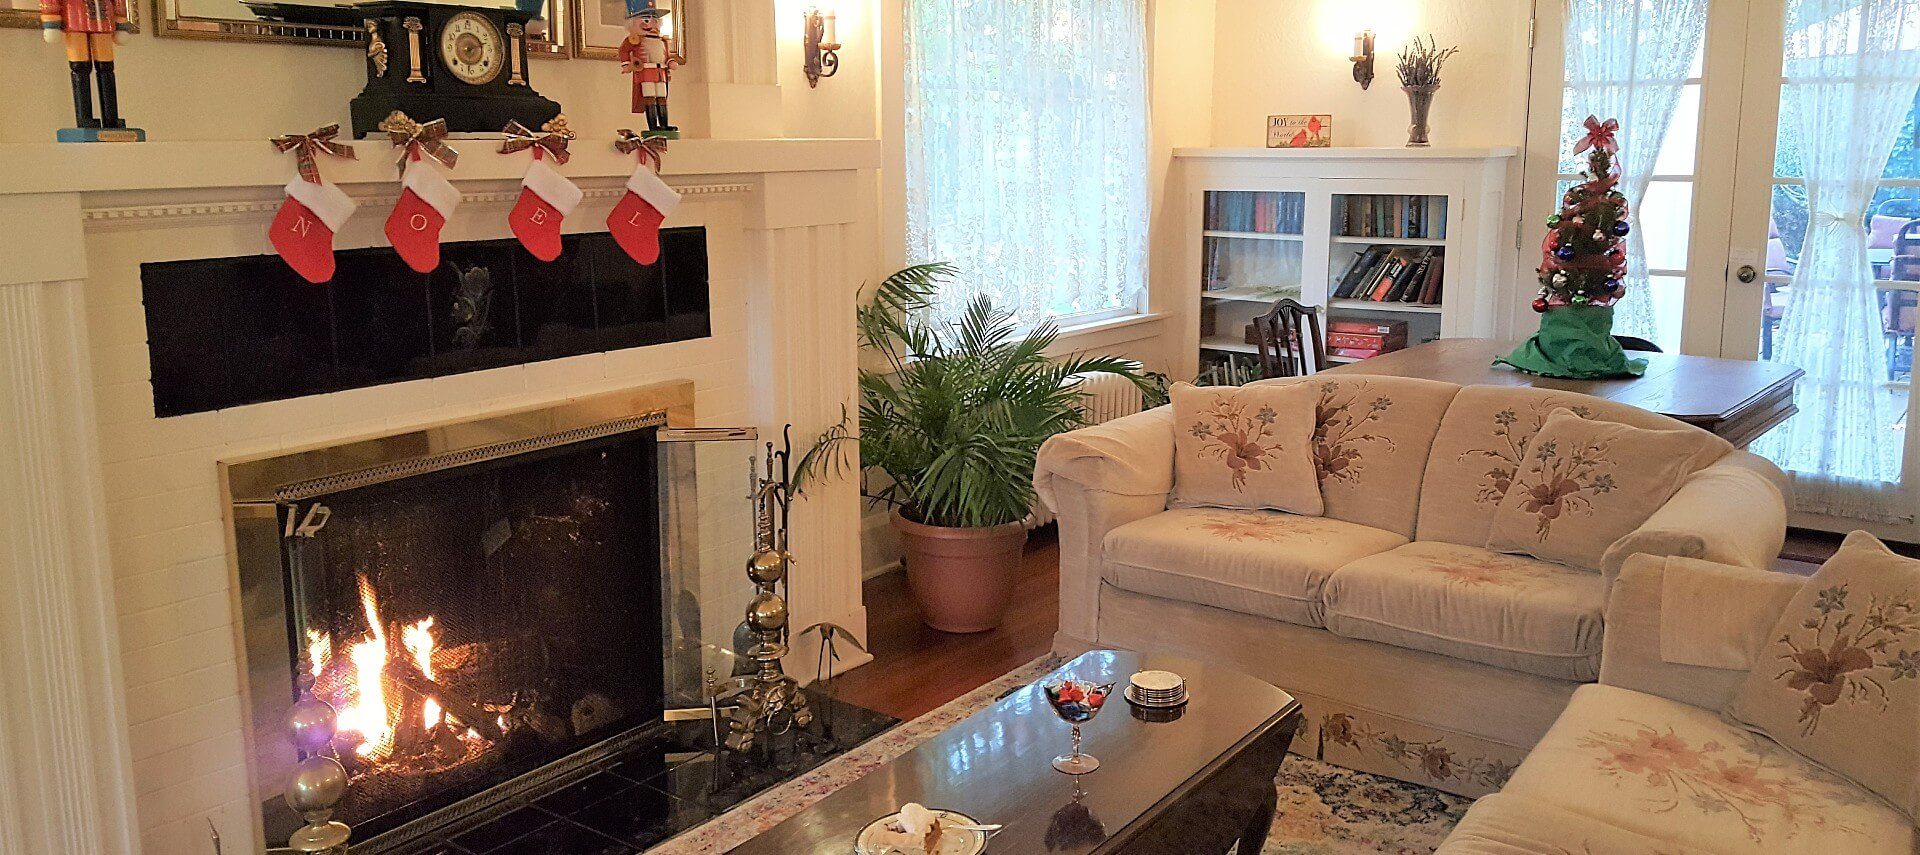 Cozy living room with two couches and coffee table in front of a lit fireplace with mantle holding small stockings